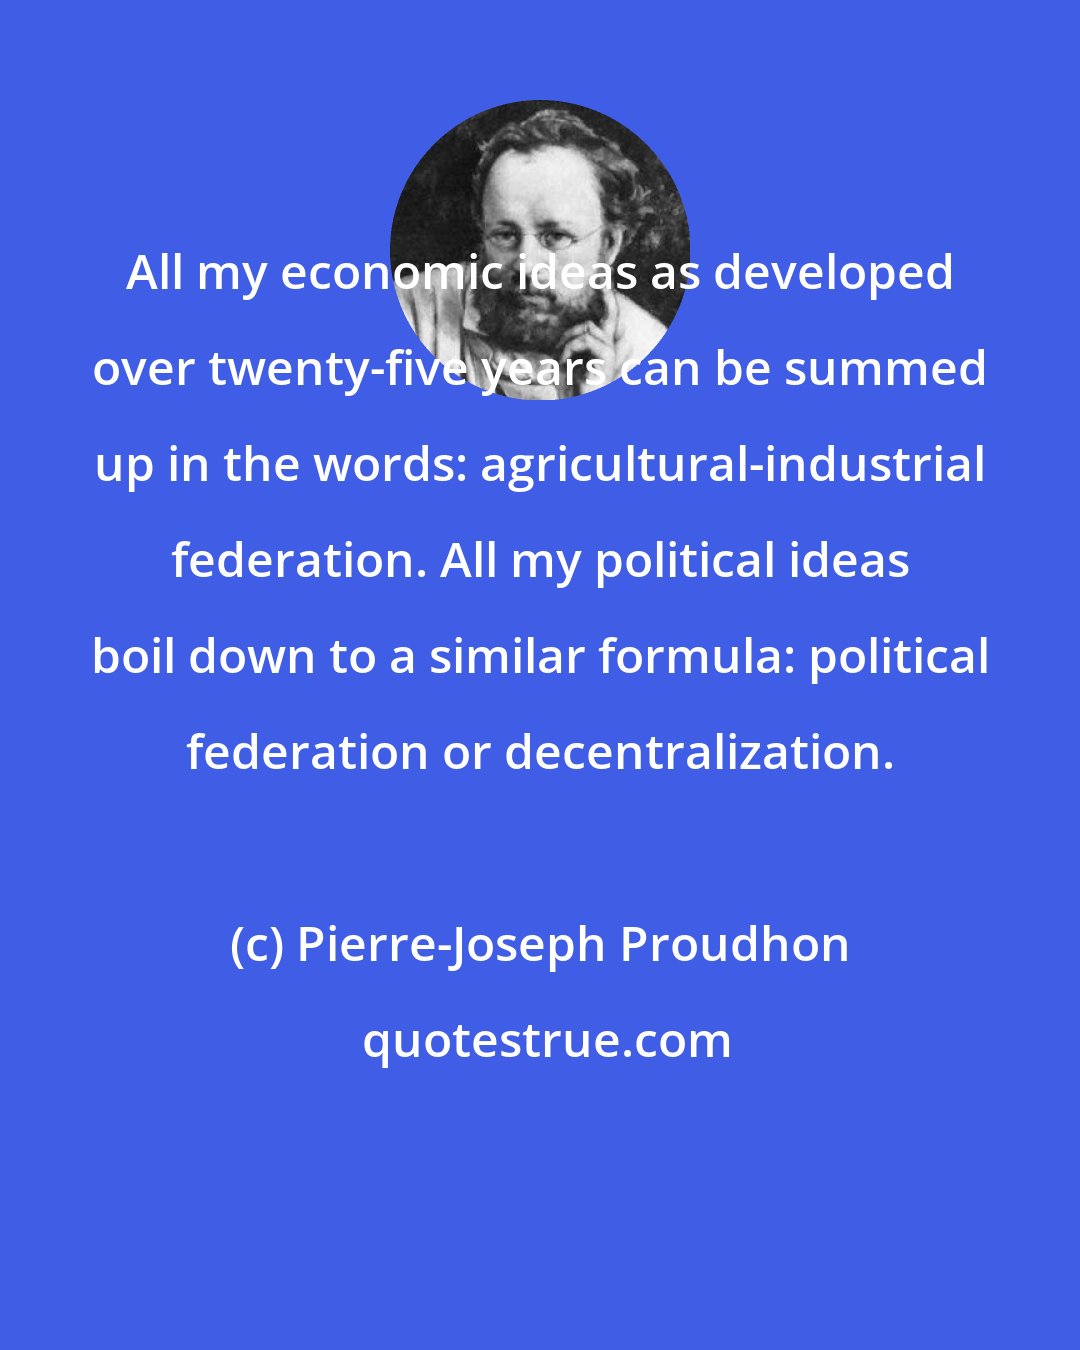 Pierre-Joseph Proudhon: All my economic ideas as developed over twenty-five years can be summed up in the words: agricultural-industrial federation. All my political ideas boil down to a similar formula: political federation or decentralization.